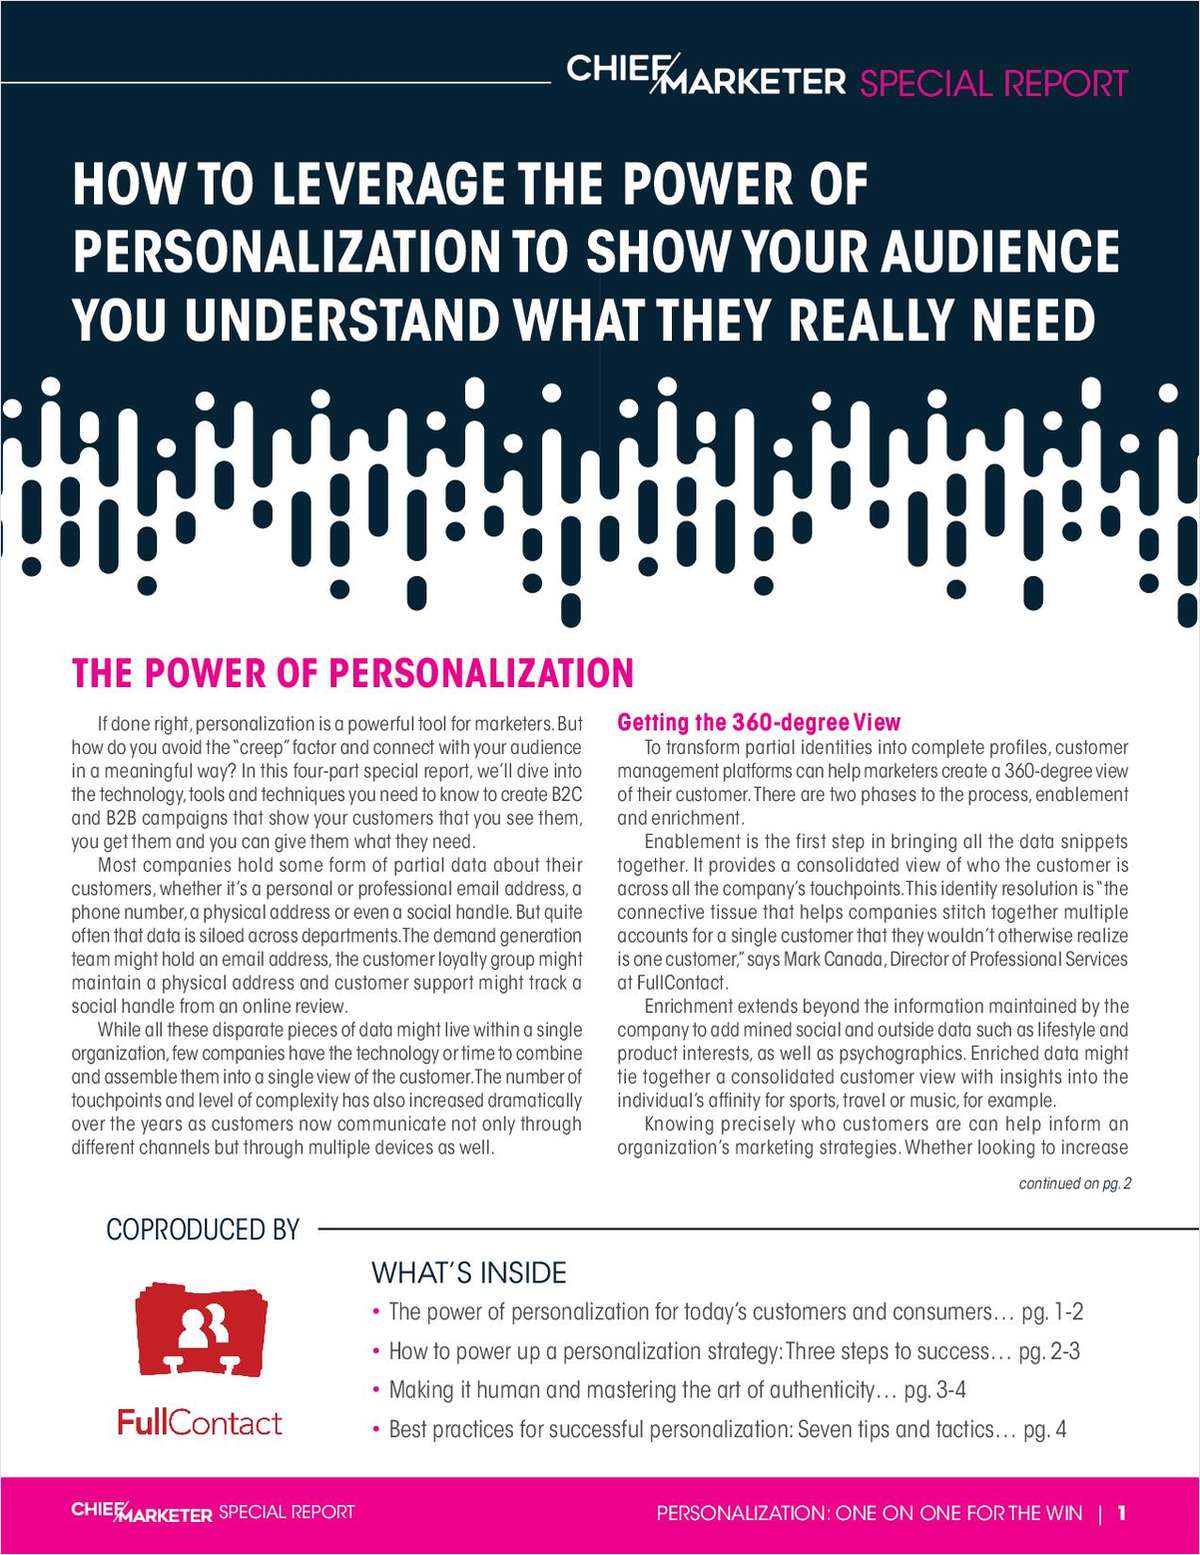 How to Leverage The Power of Personalization to Show Your Audience You Understand What They Really Need